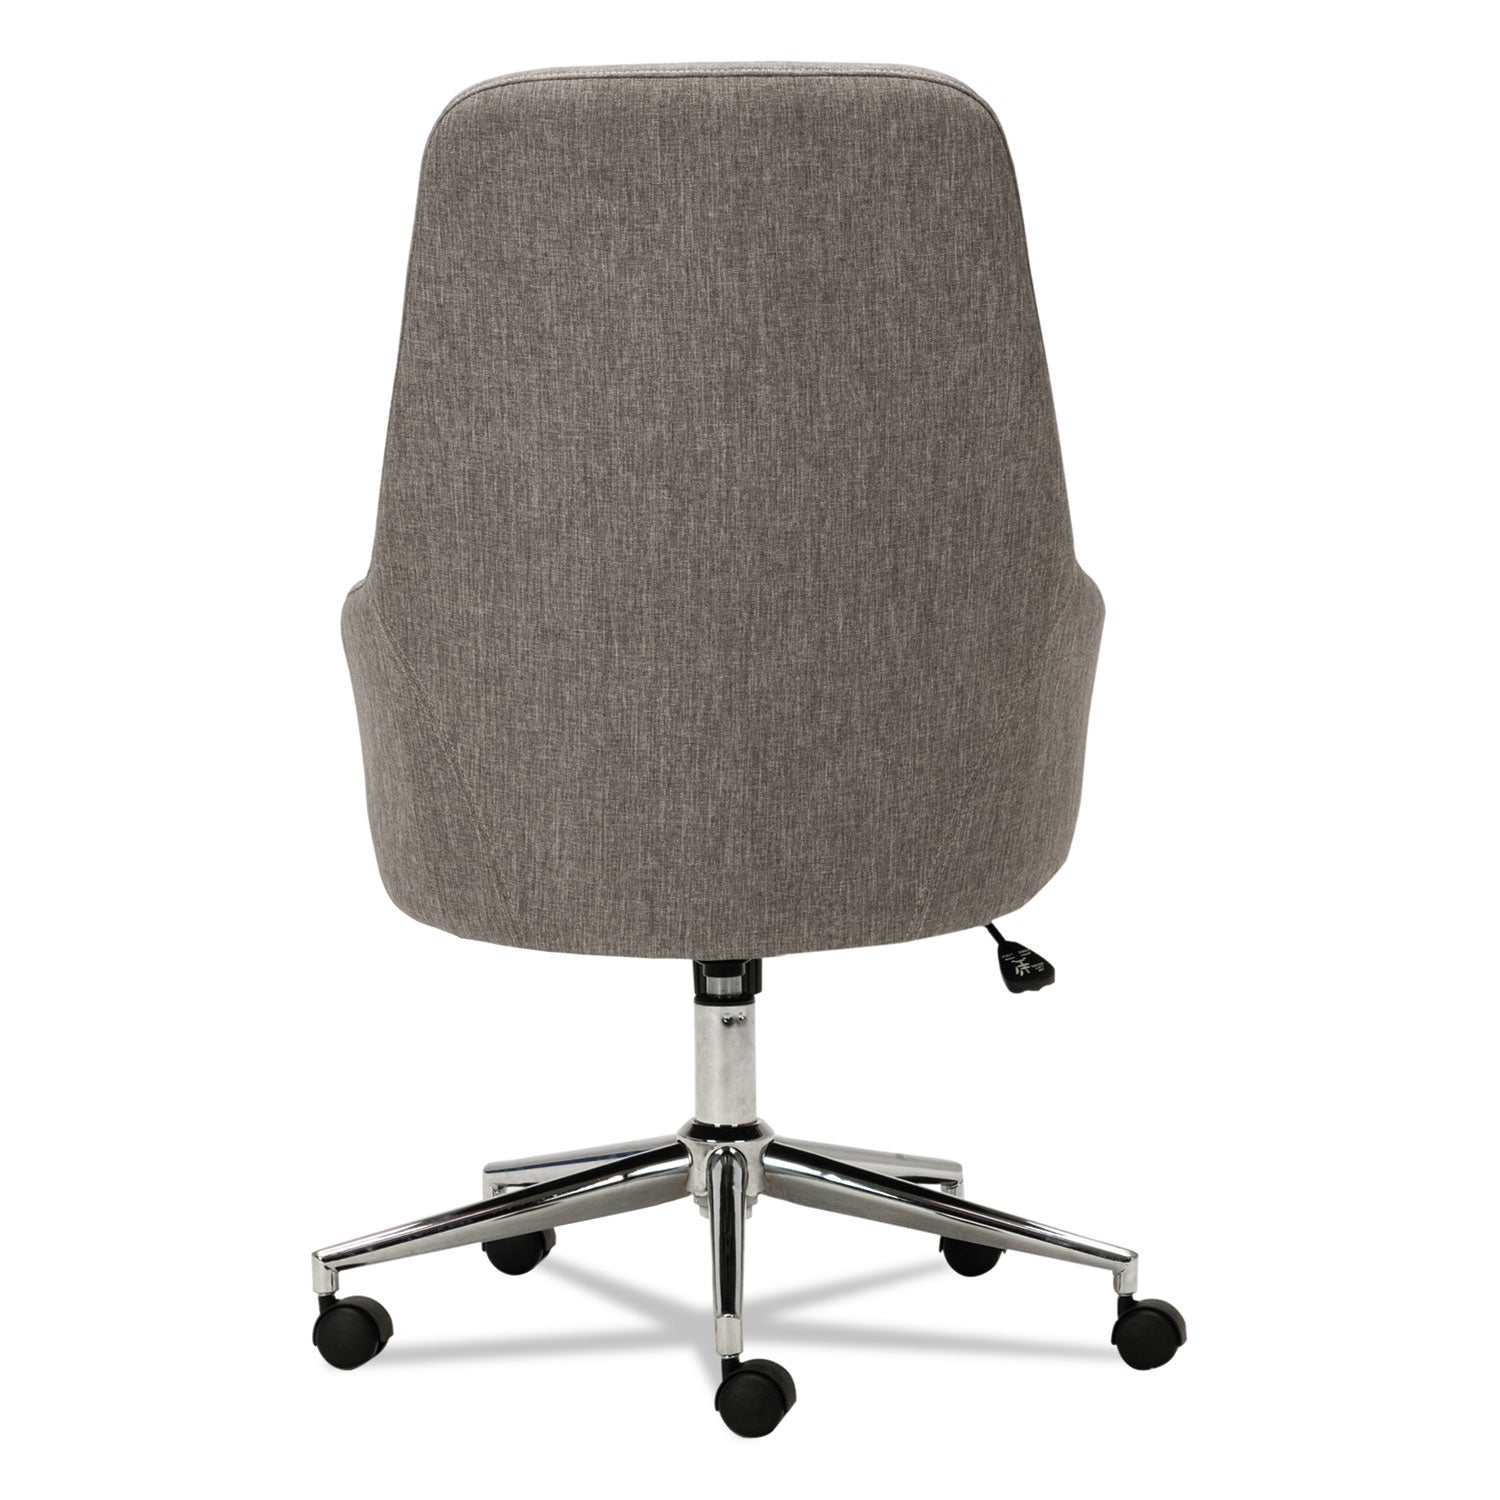 alera-captain-series-high-back-chair-supports-up-to-275-lb-171-to-201-seat-height-gray-tweed-seat-back-chrome-base_alecs4151 - 4